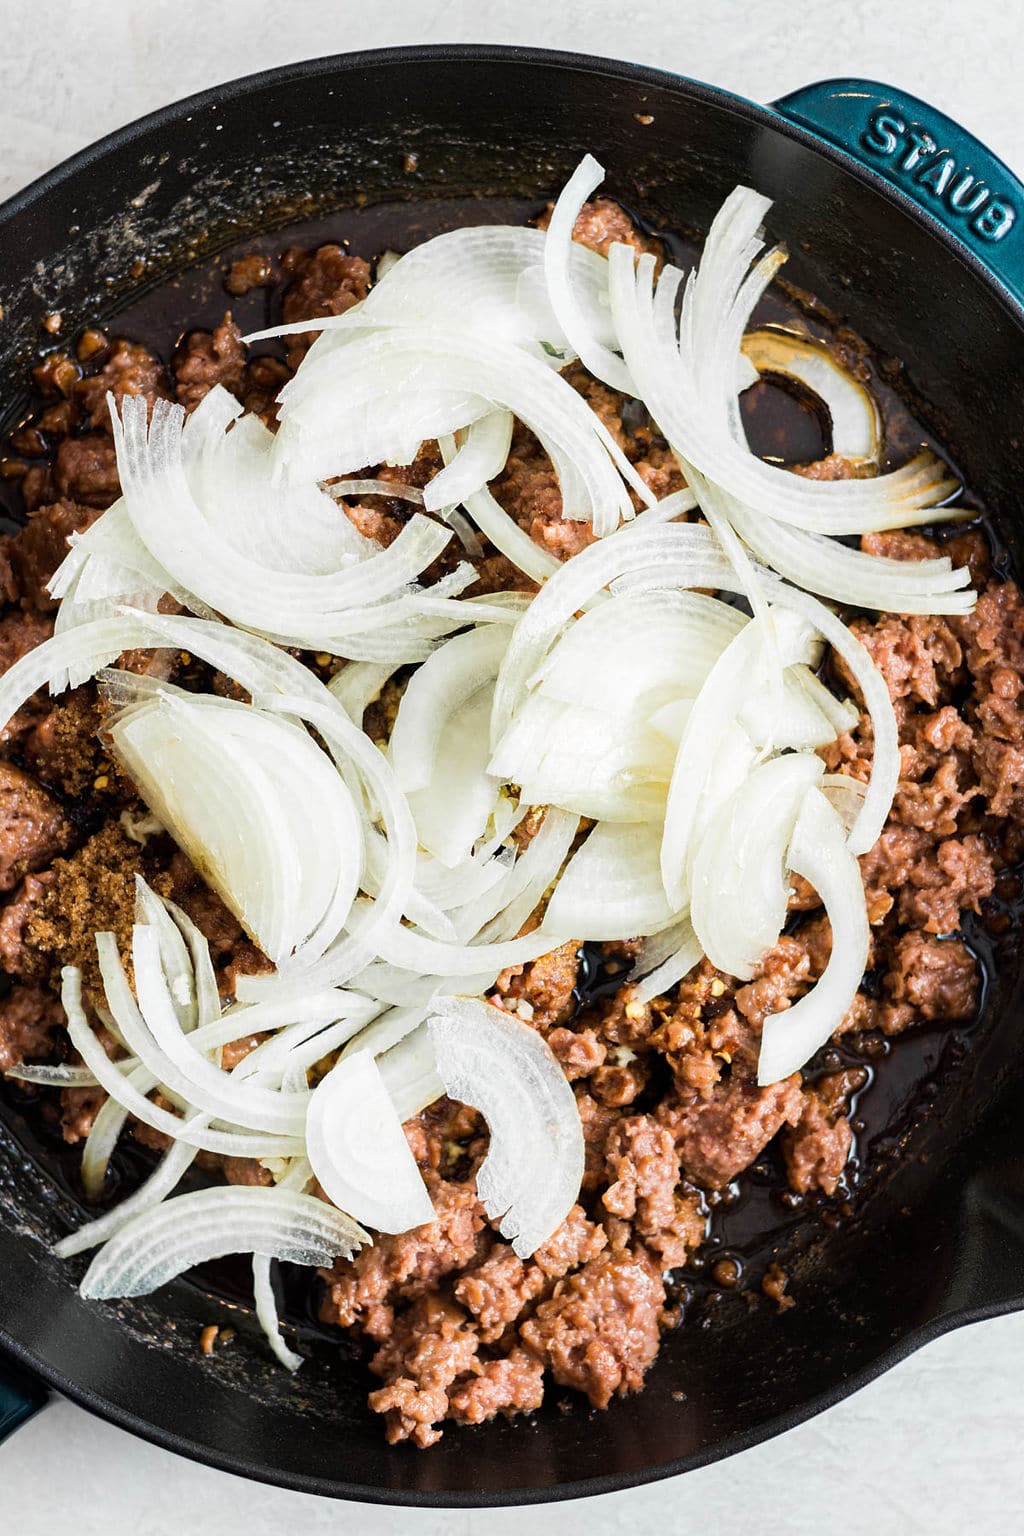 raw onions on top of cooked vegan ground beef in a black skillet.